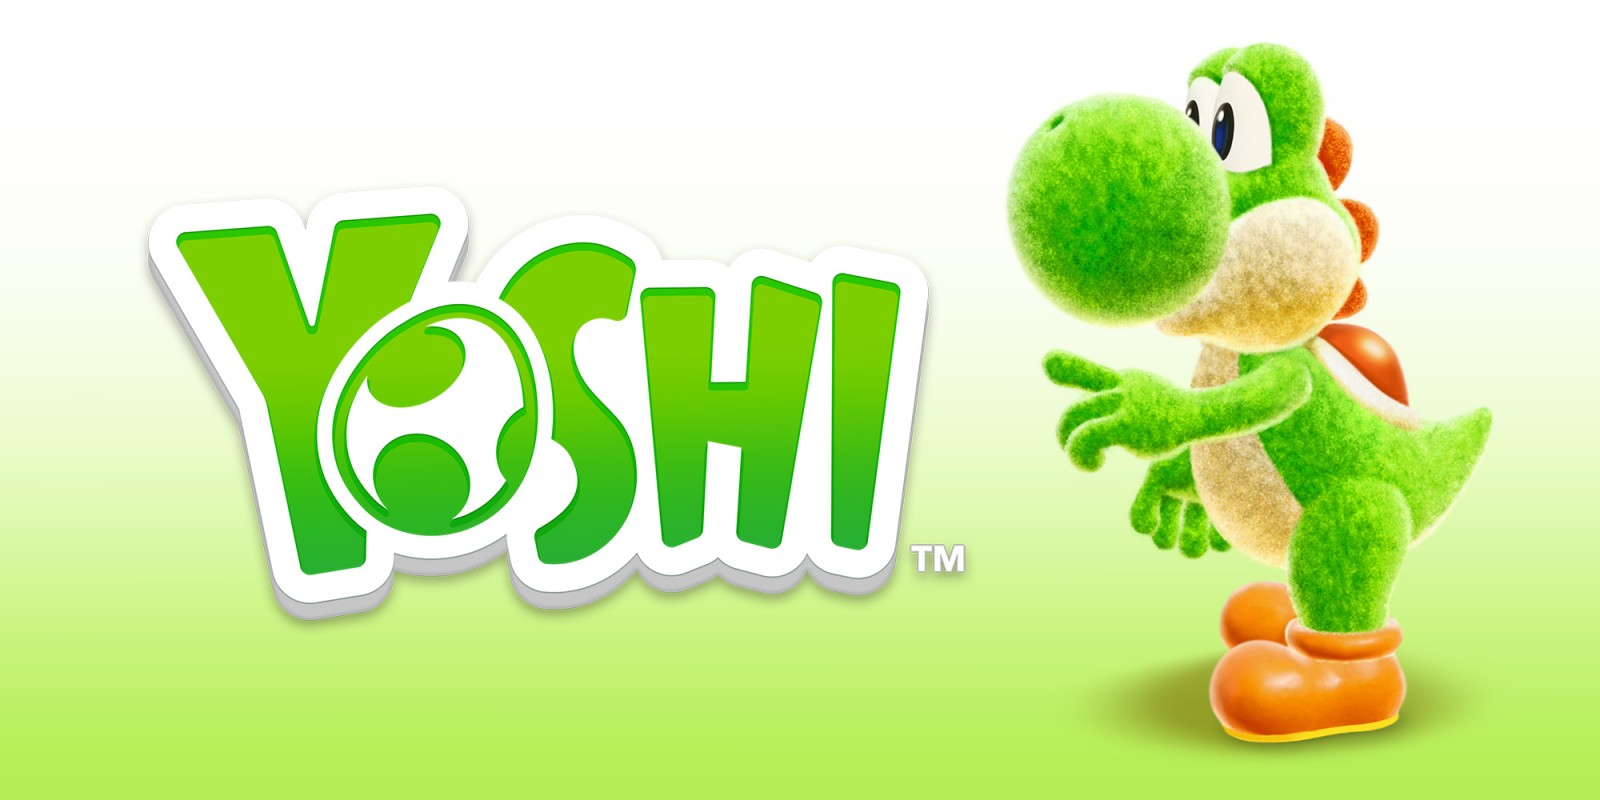 [Rumor] Yoshi for Nintendo Switch available on June 29